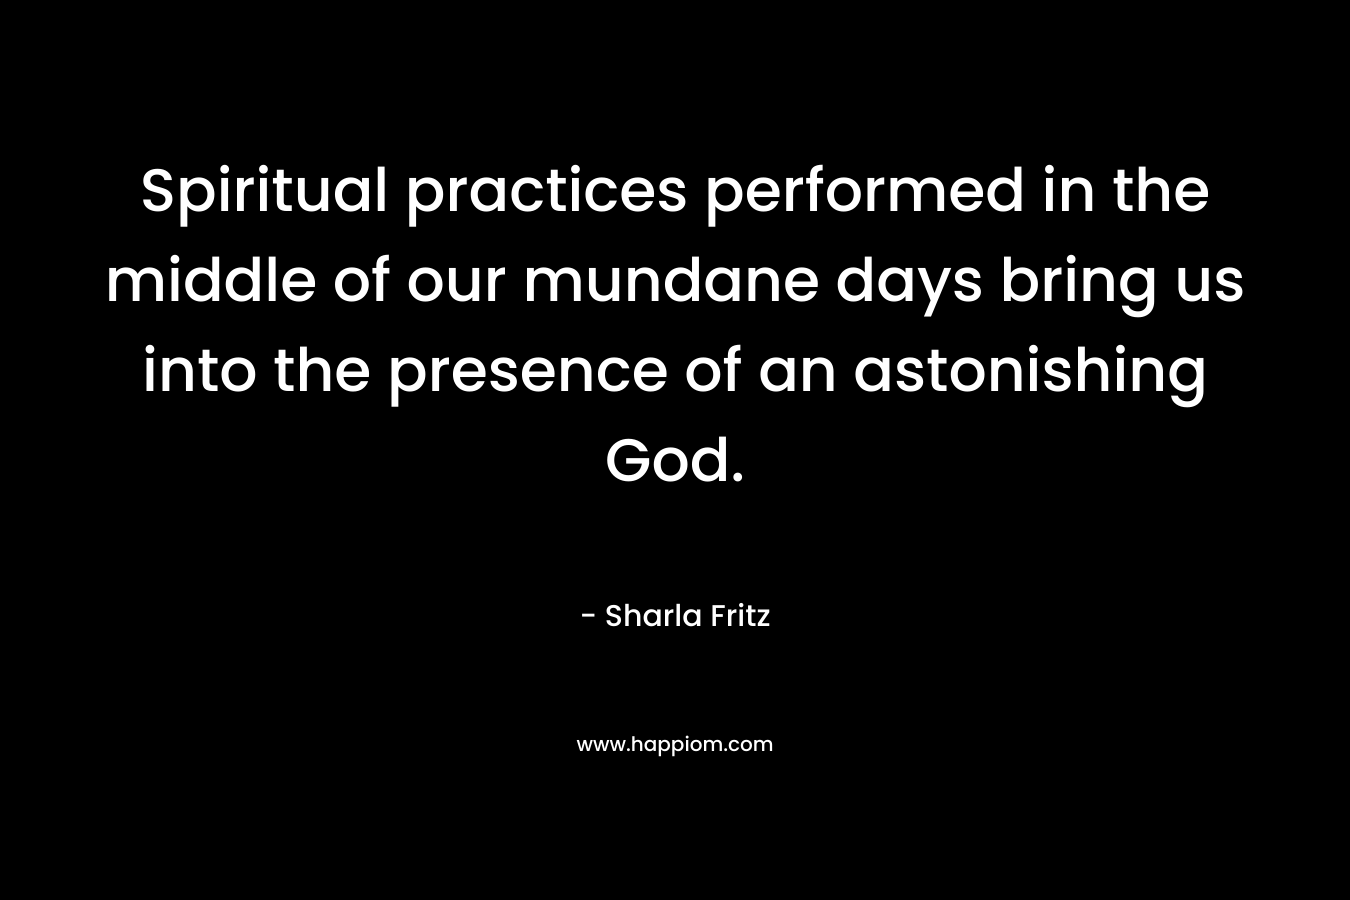 Spiritual practices performed in the middle of our mundane days bring us into the presence of an astonishing God.